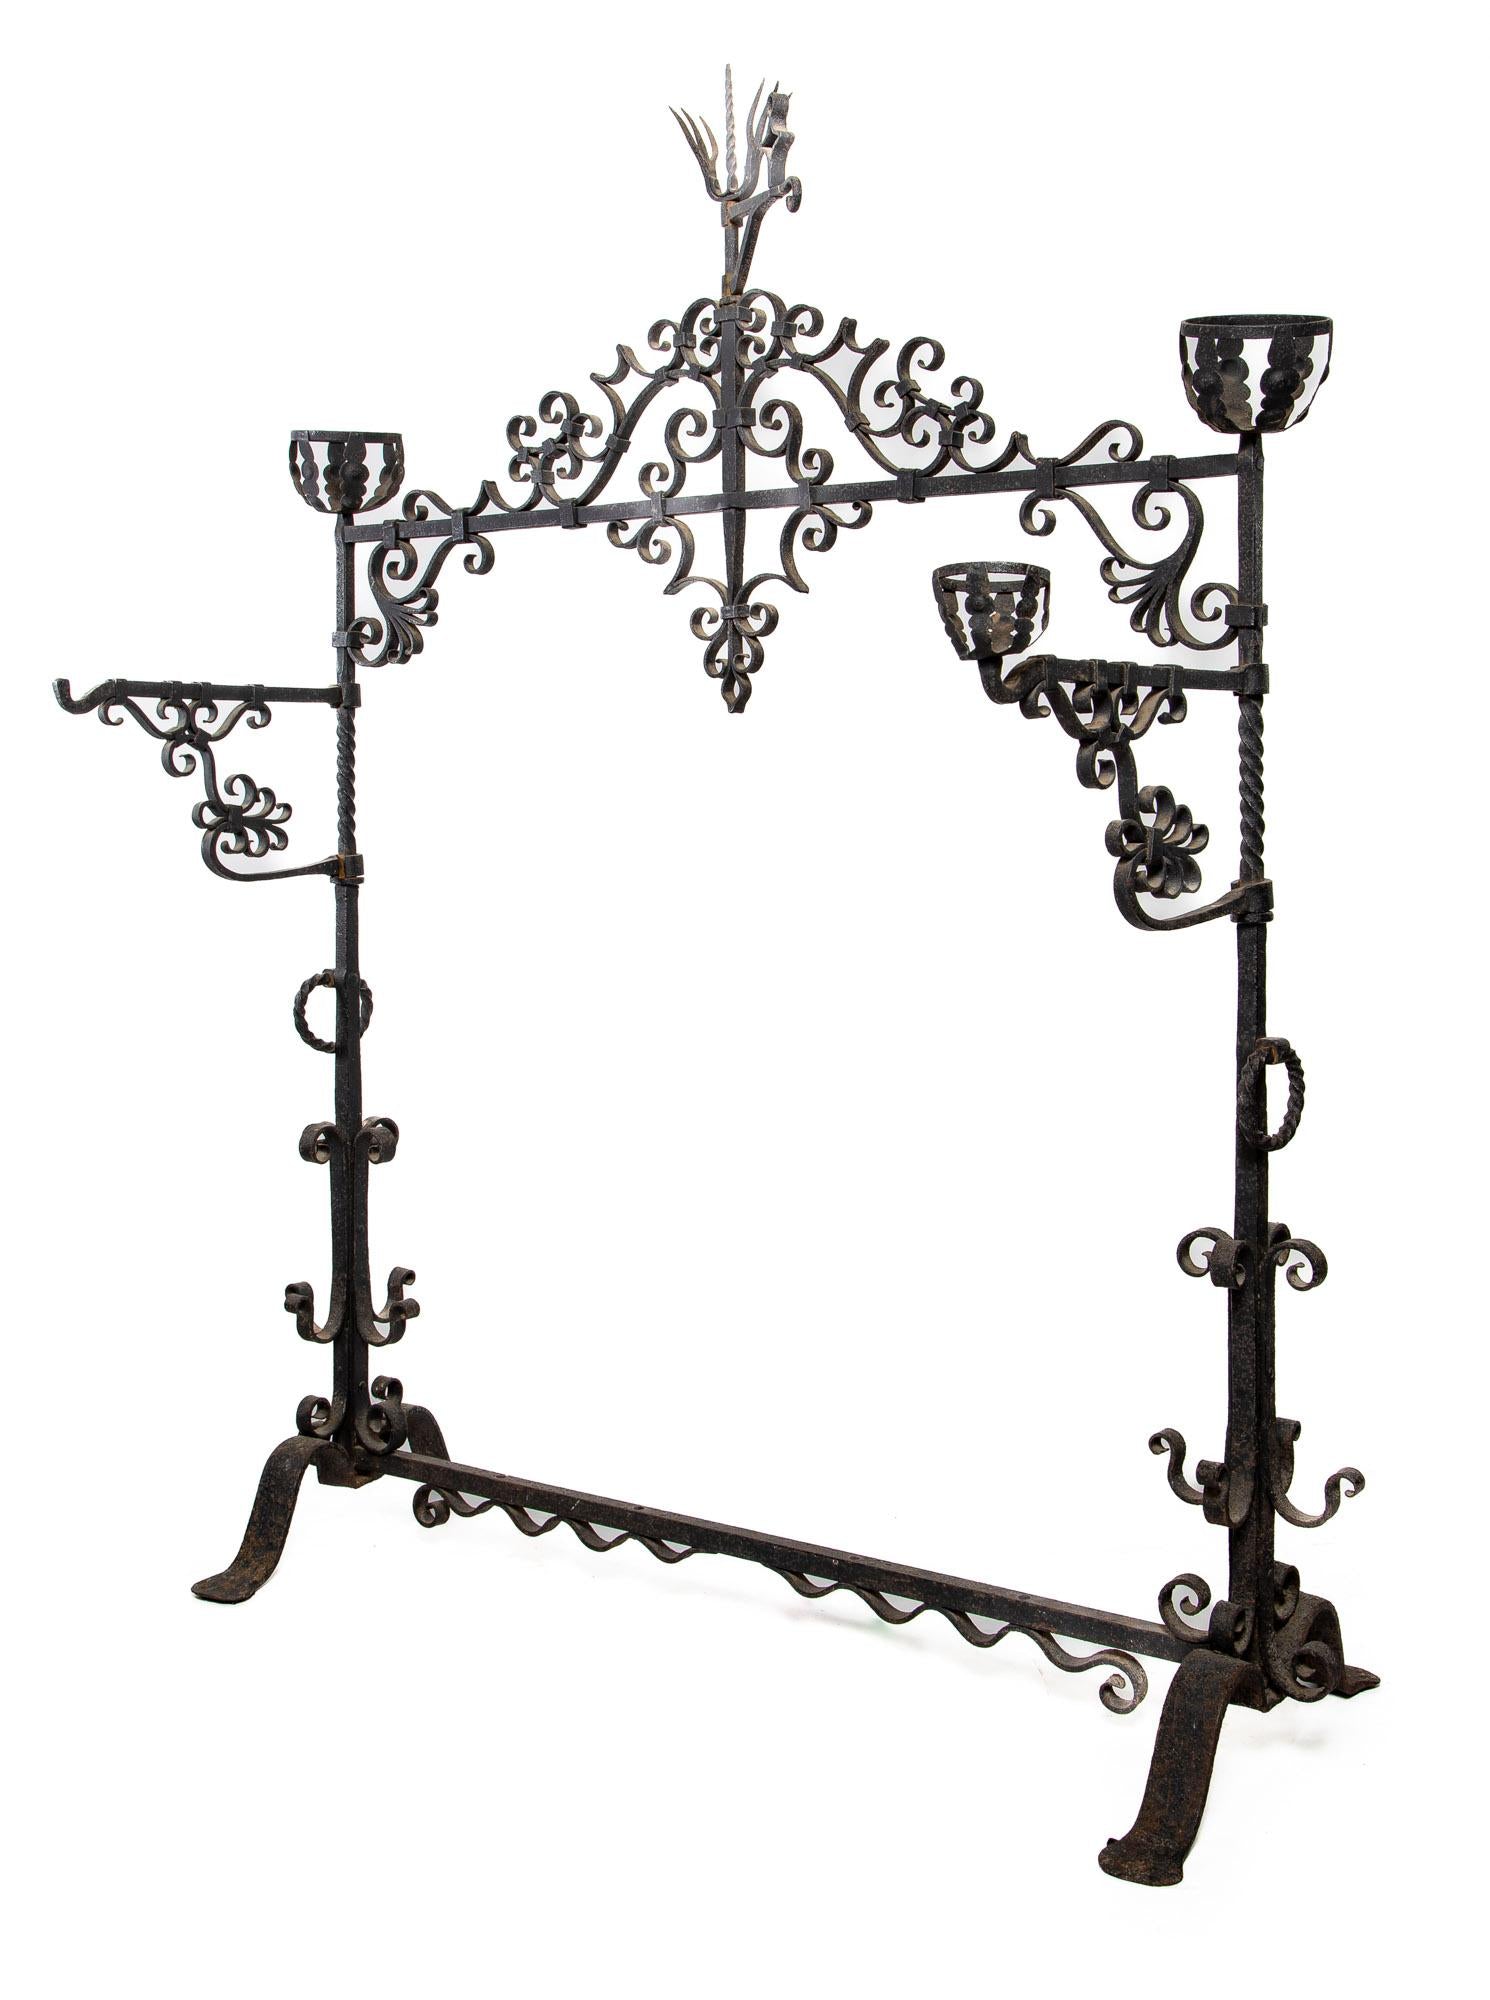 An 18th Century Spanish wrought iron Eclesiastical Candlestand